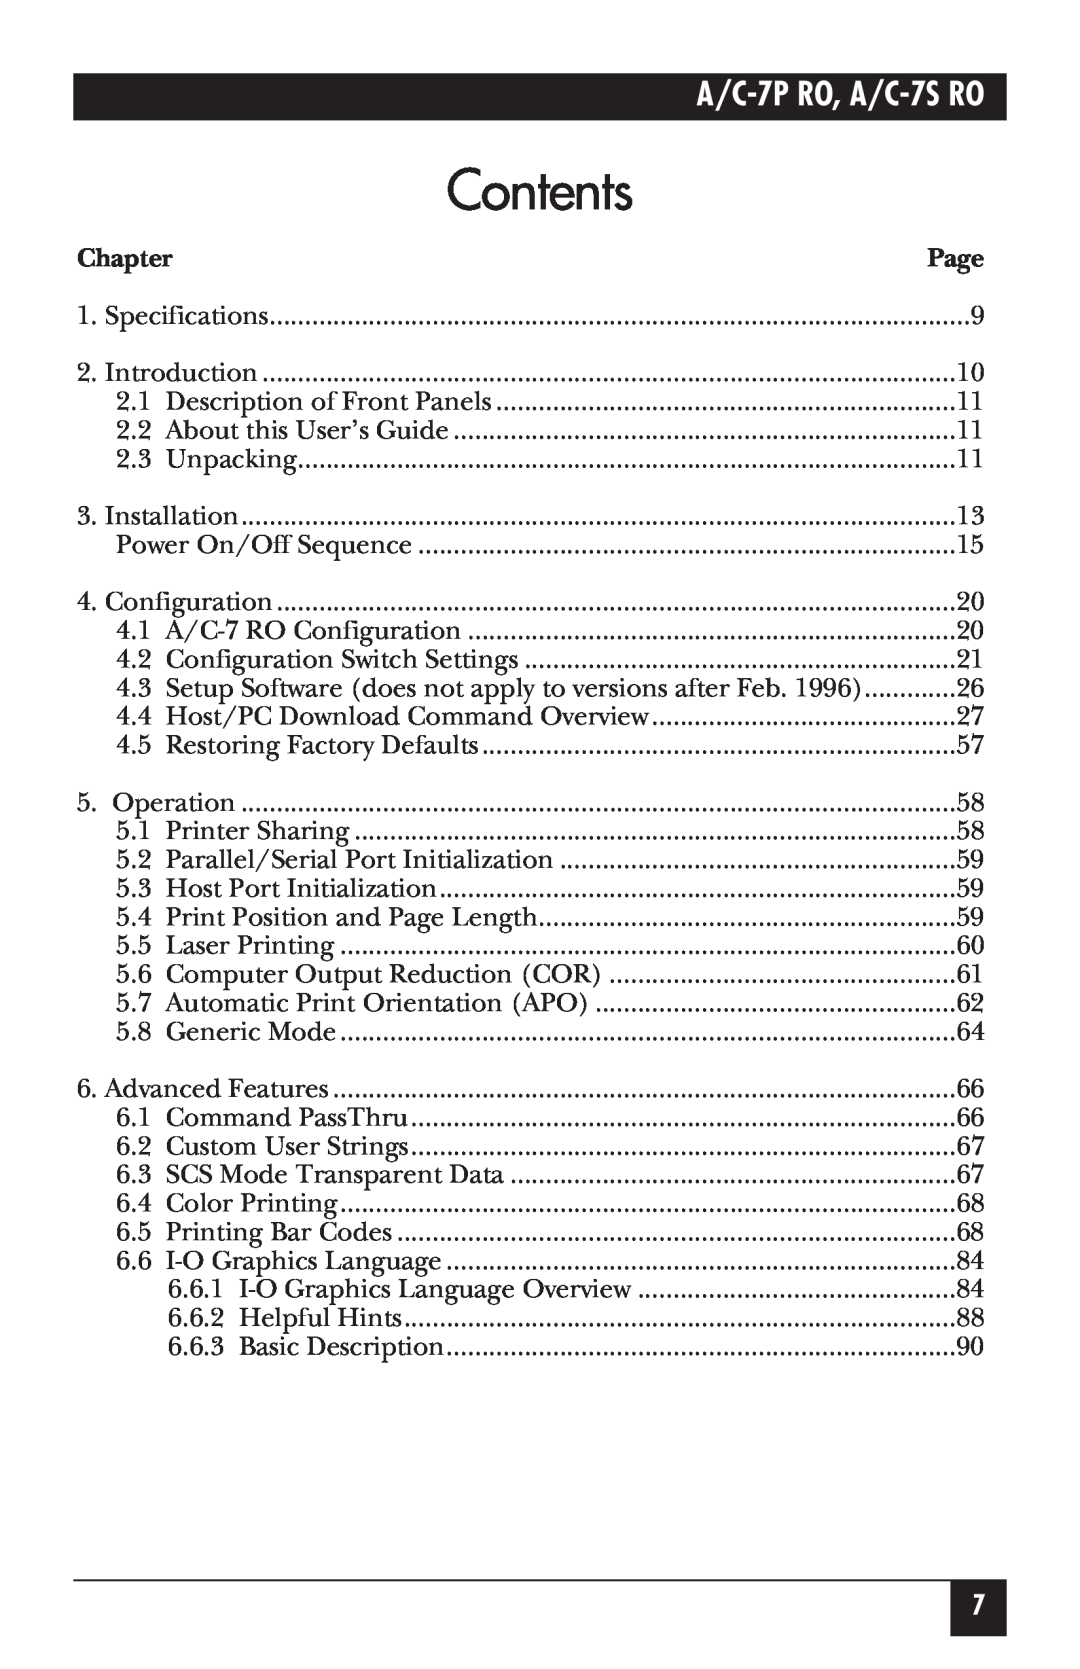 Black Box manual Contents, Chapter, Page, A/C-7P RO, A/C-7S RO 